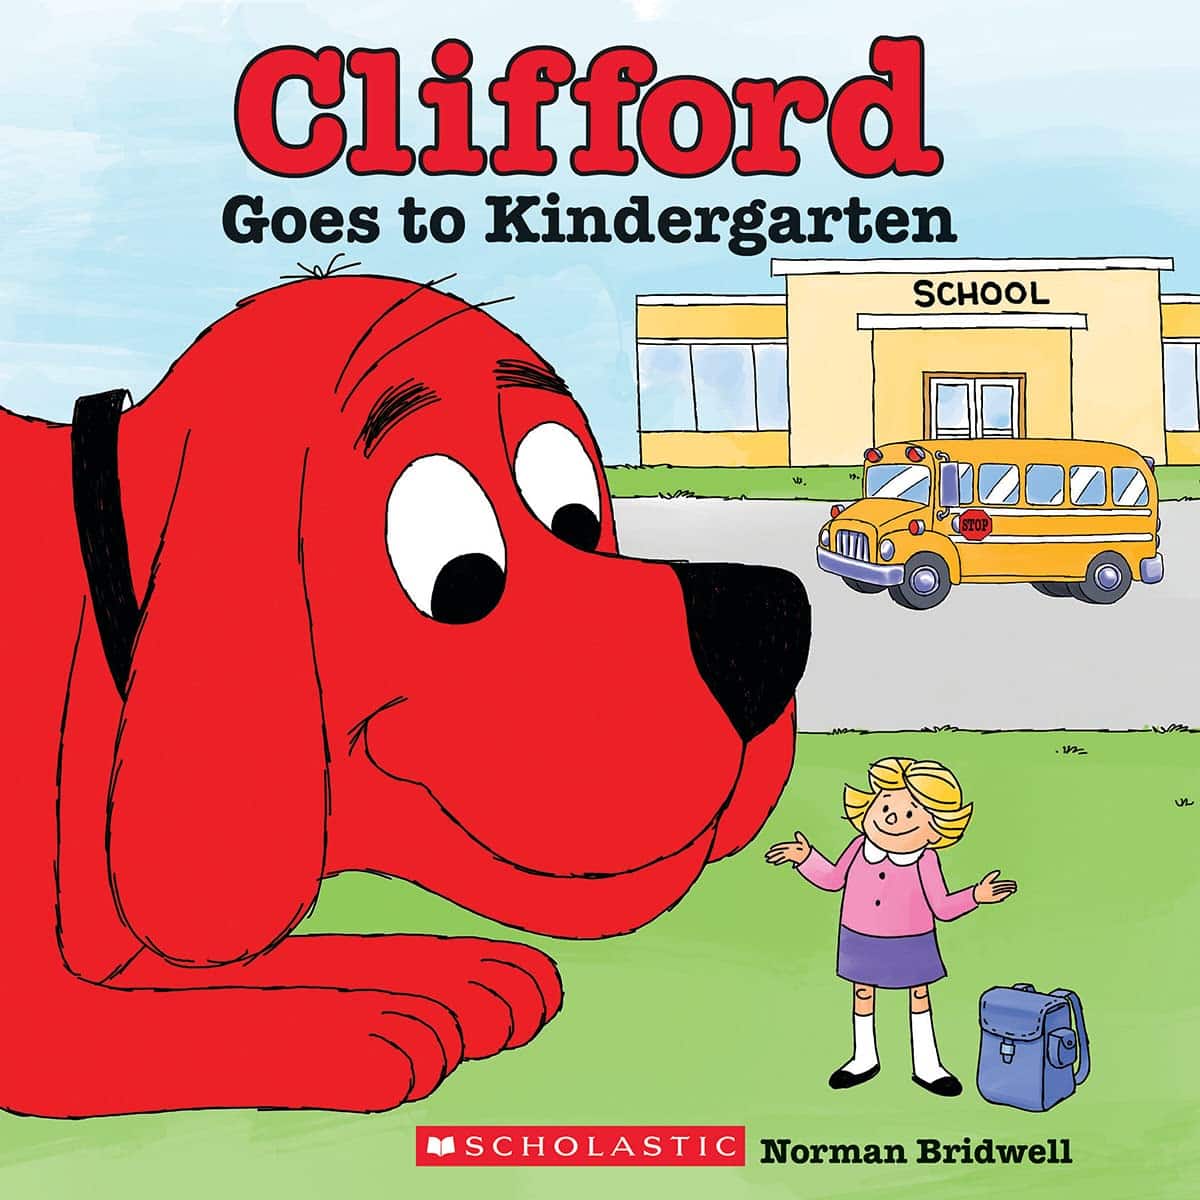 "Clifford Goes to Kindergarten" by Norman Bridwell